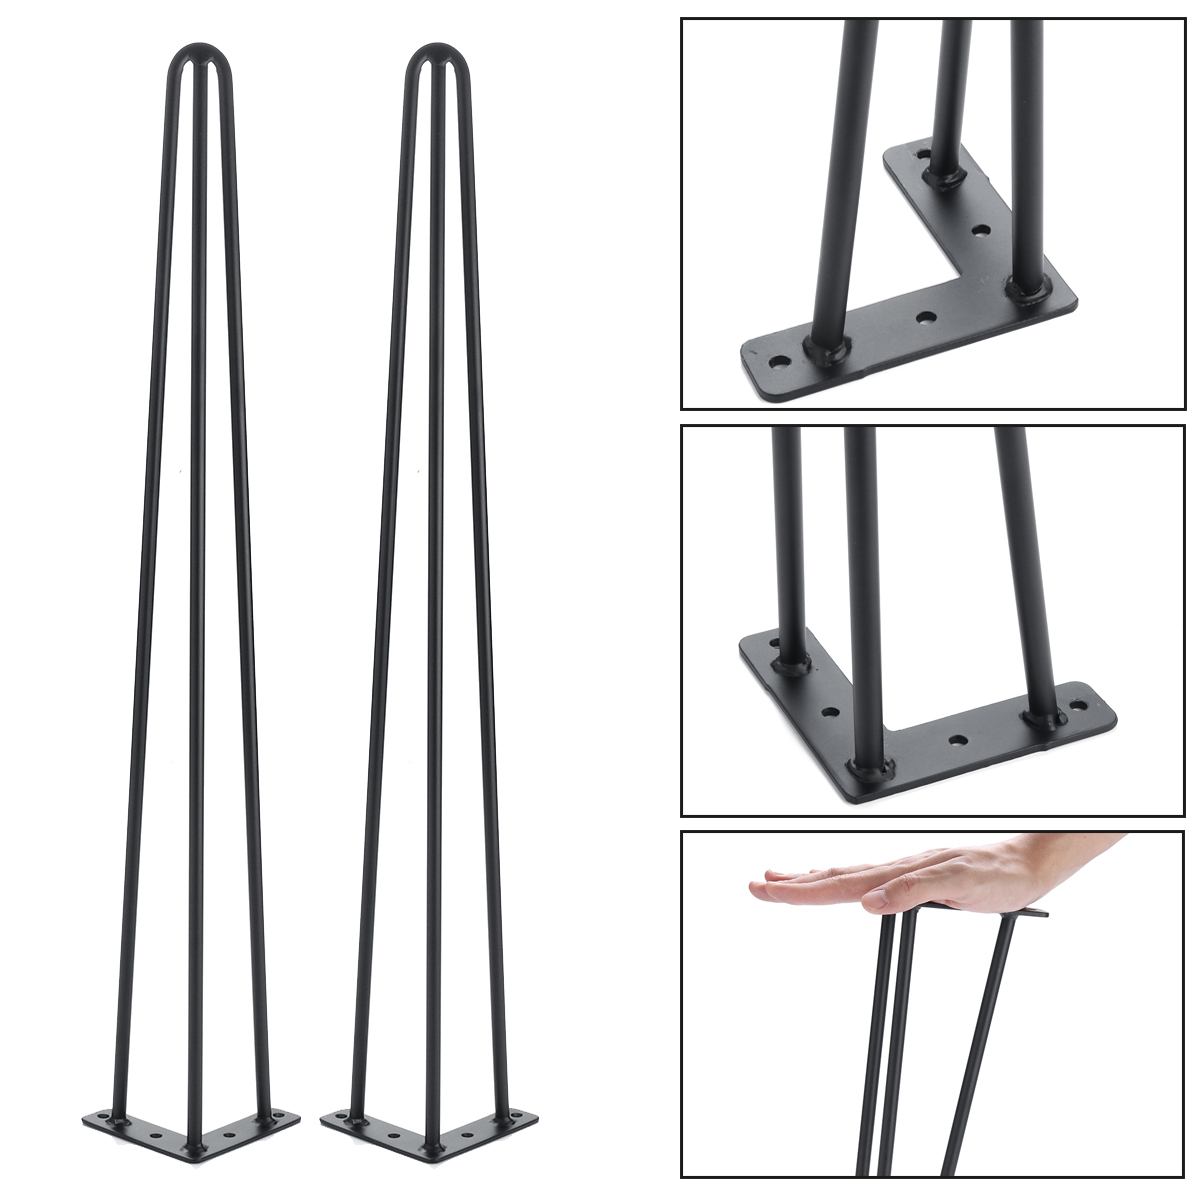 4pcs Iron Table Legs Metal Hairpin Legs Home Furniture Accessories Meubles Feet Pads Furniture Legs Kitchen Furniture Fittings